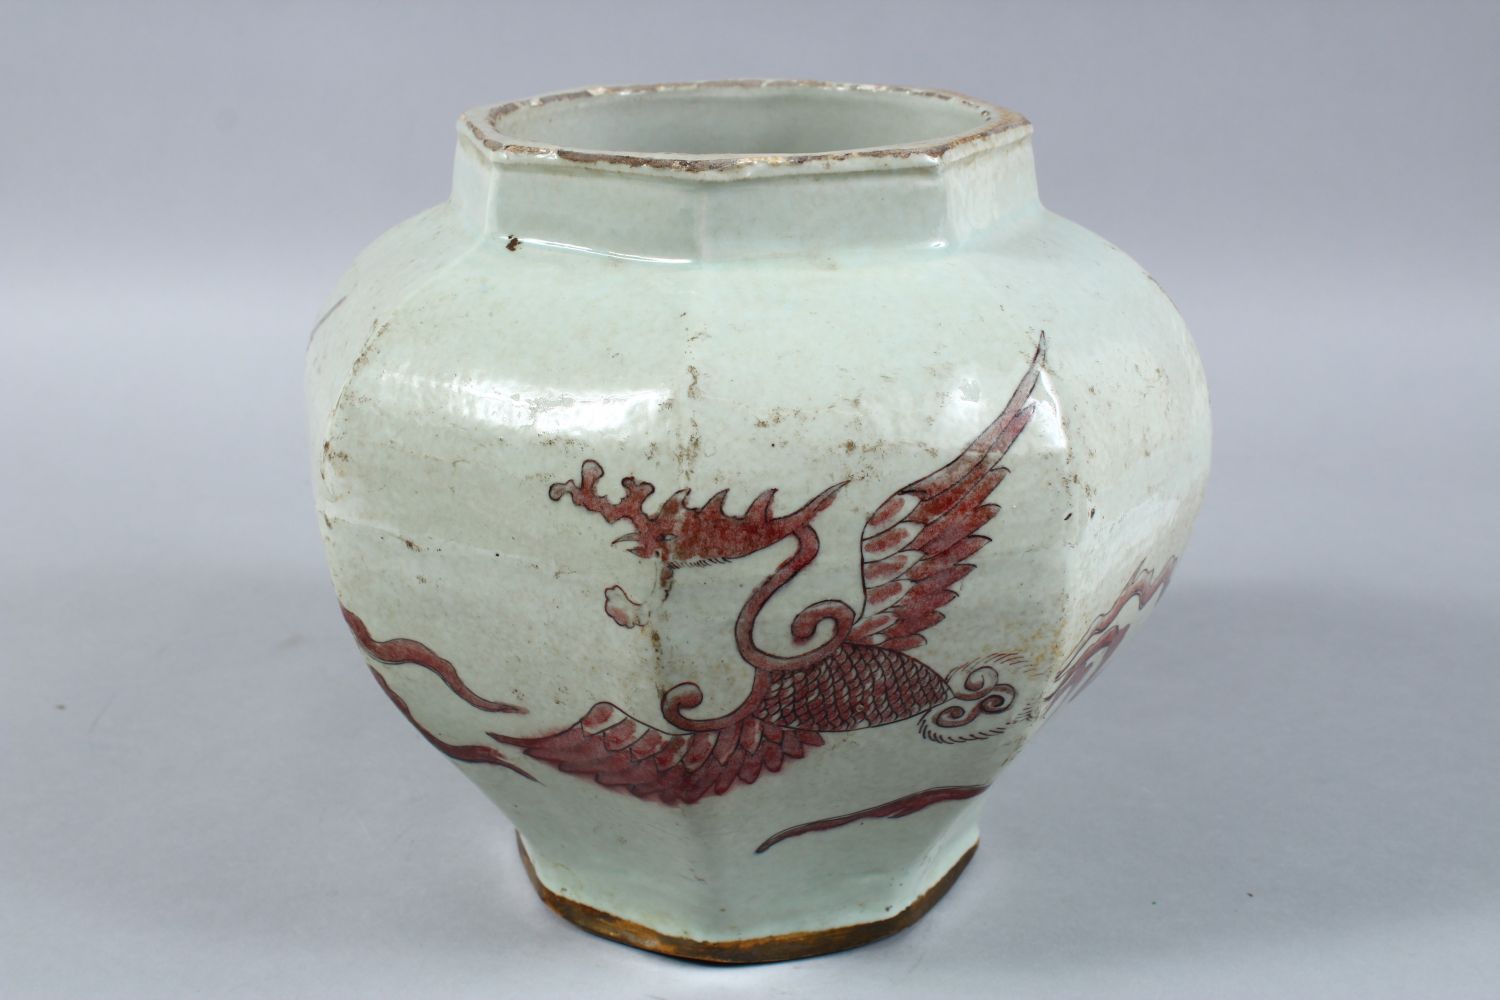 A CHINESE IRON RED DECORATED OCTAGONAL PORCELAIN JAR, the body of the jar decorated in iron red to - Image 3 of 8